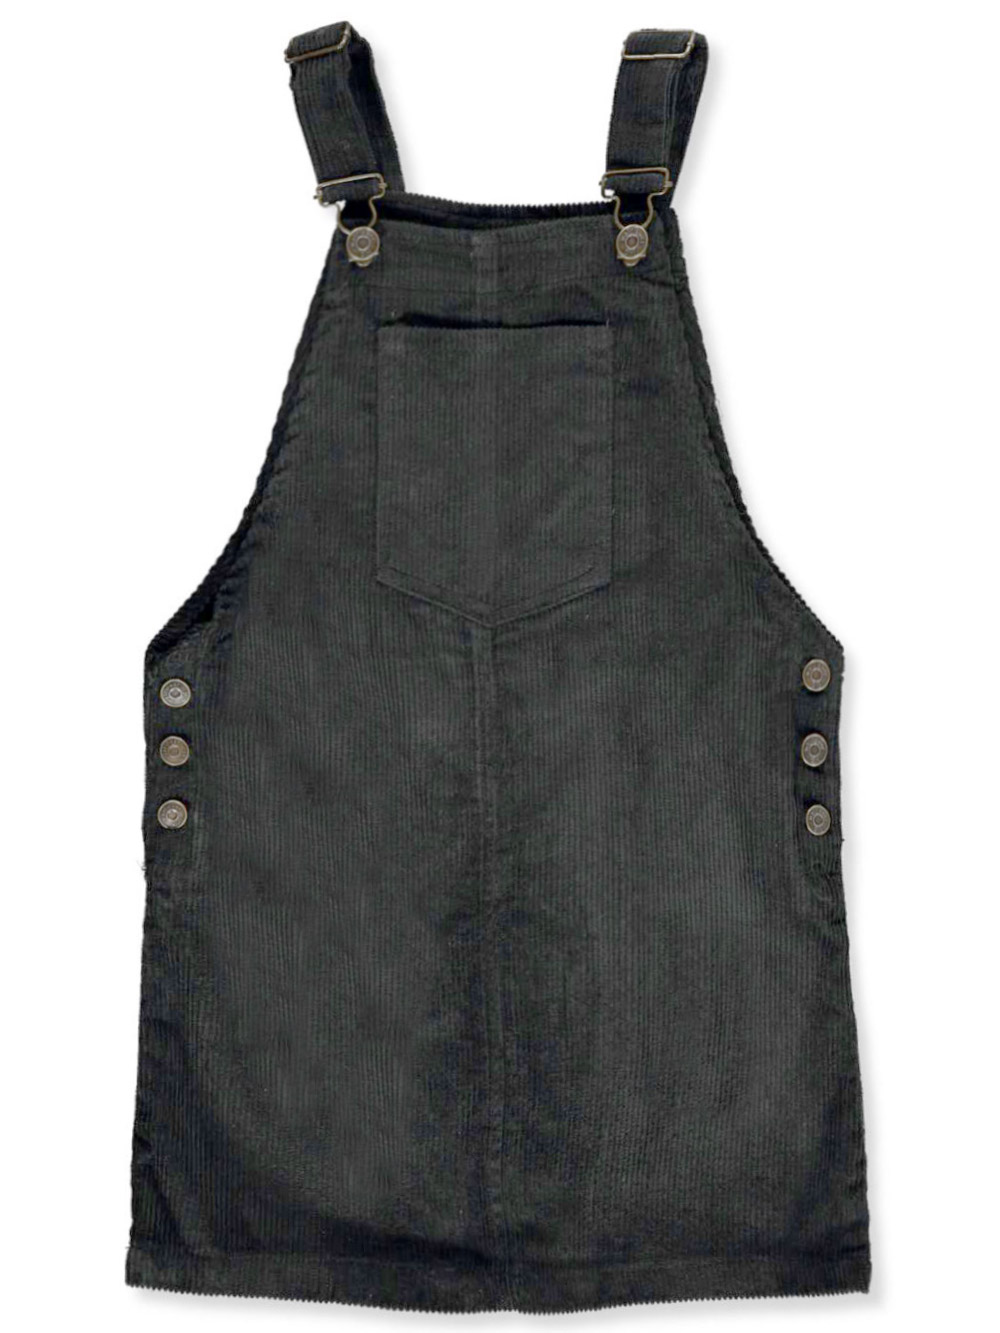 Girls Overalls Jumpers